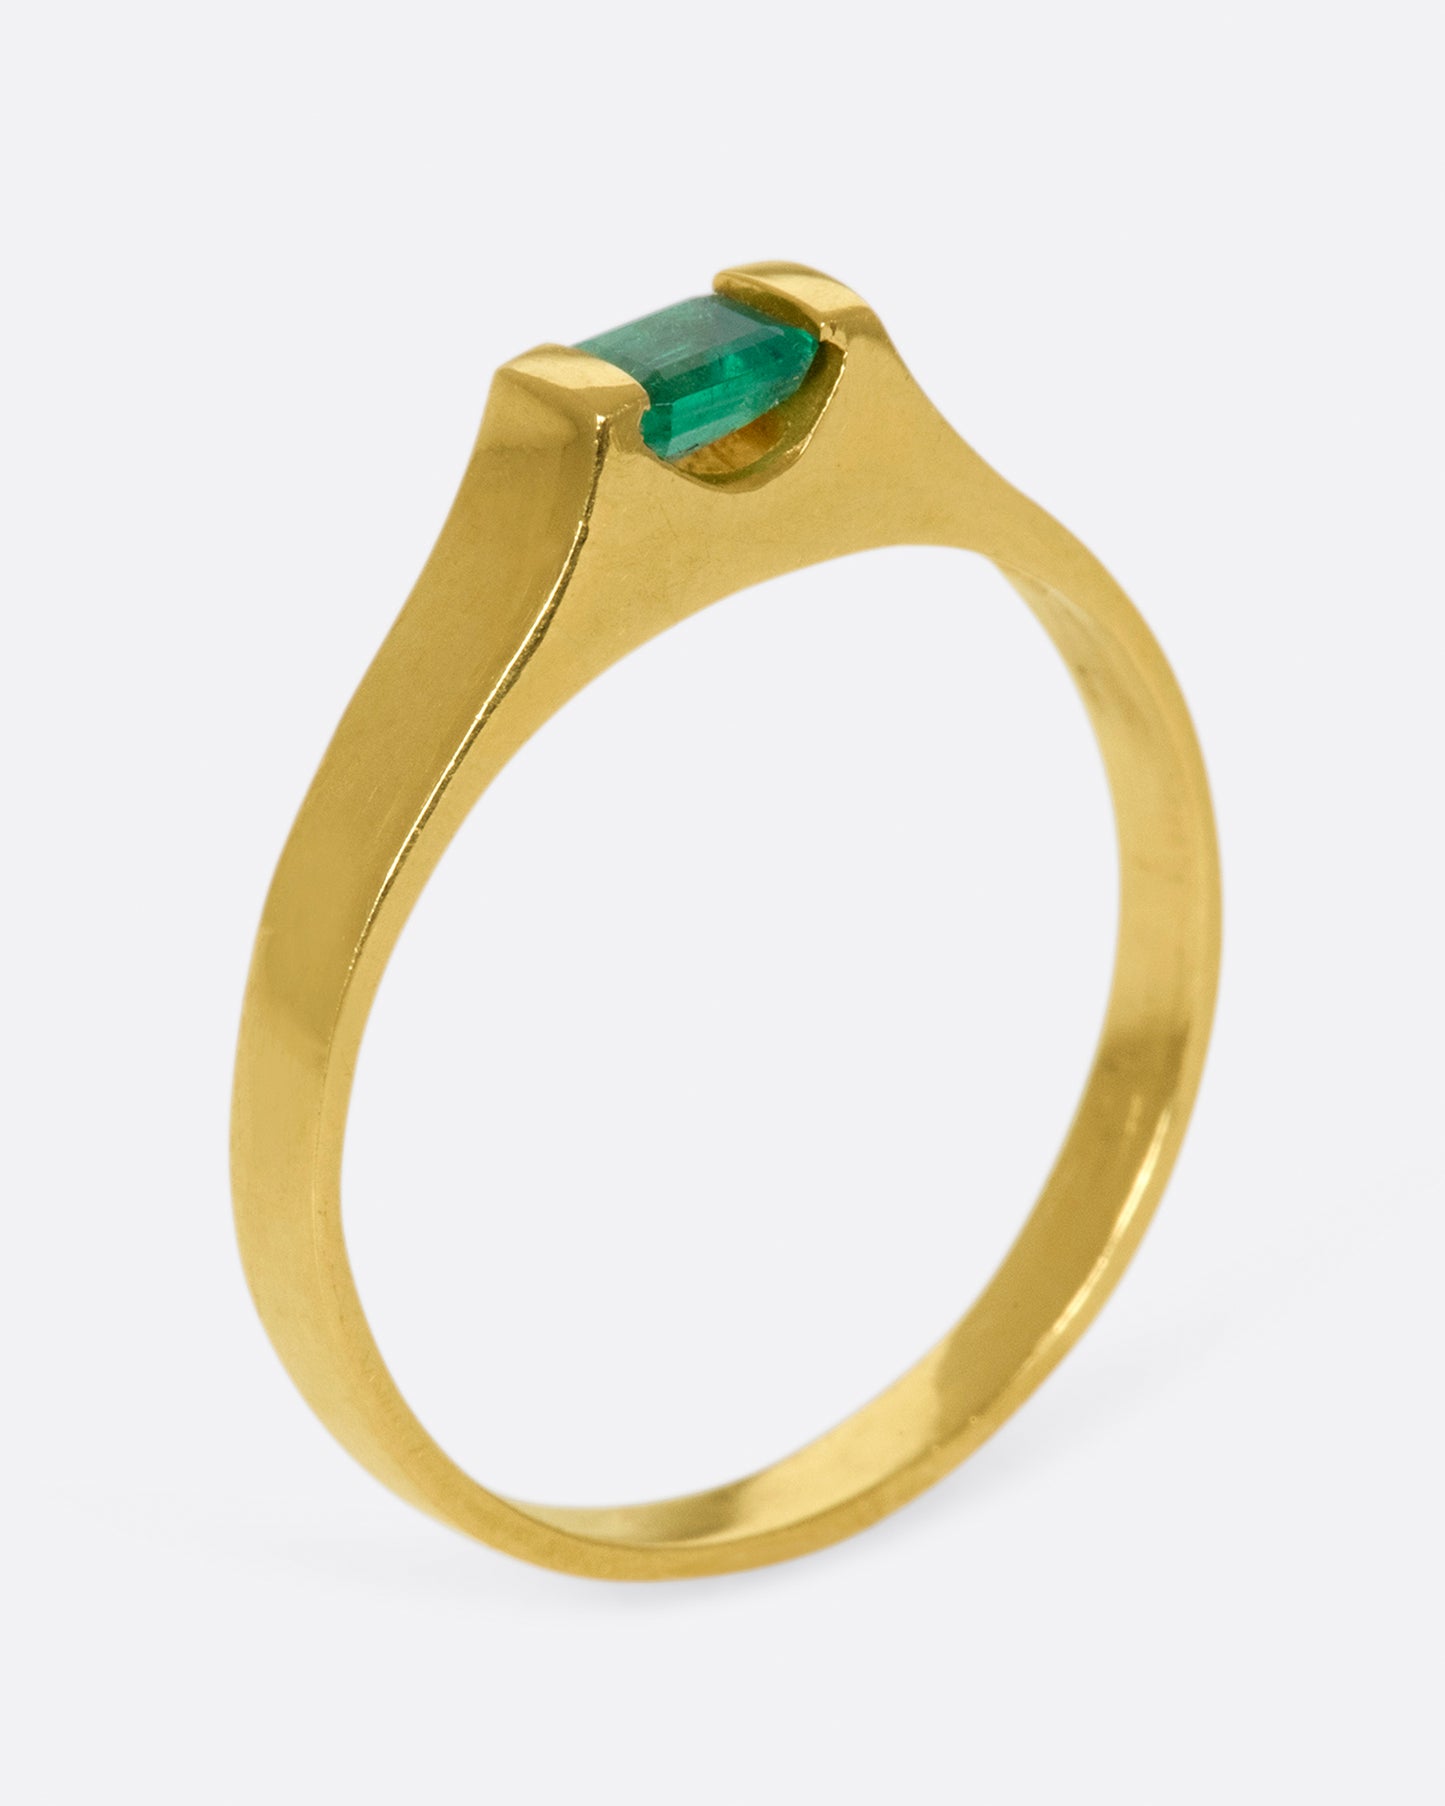 A gold solitaire ring with a tension set emerald cut emerald.